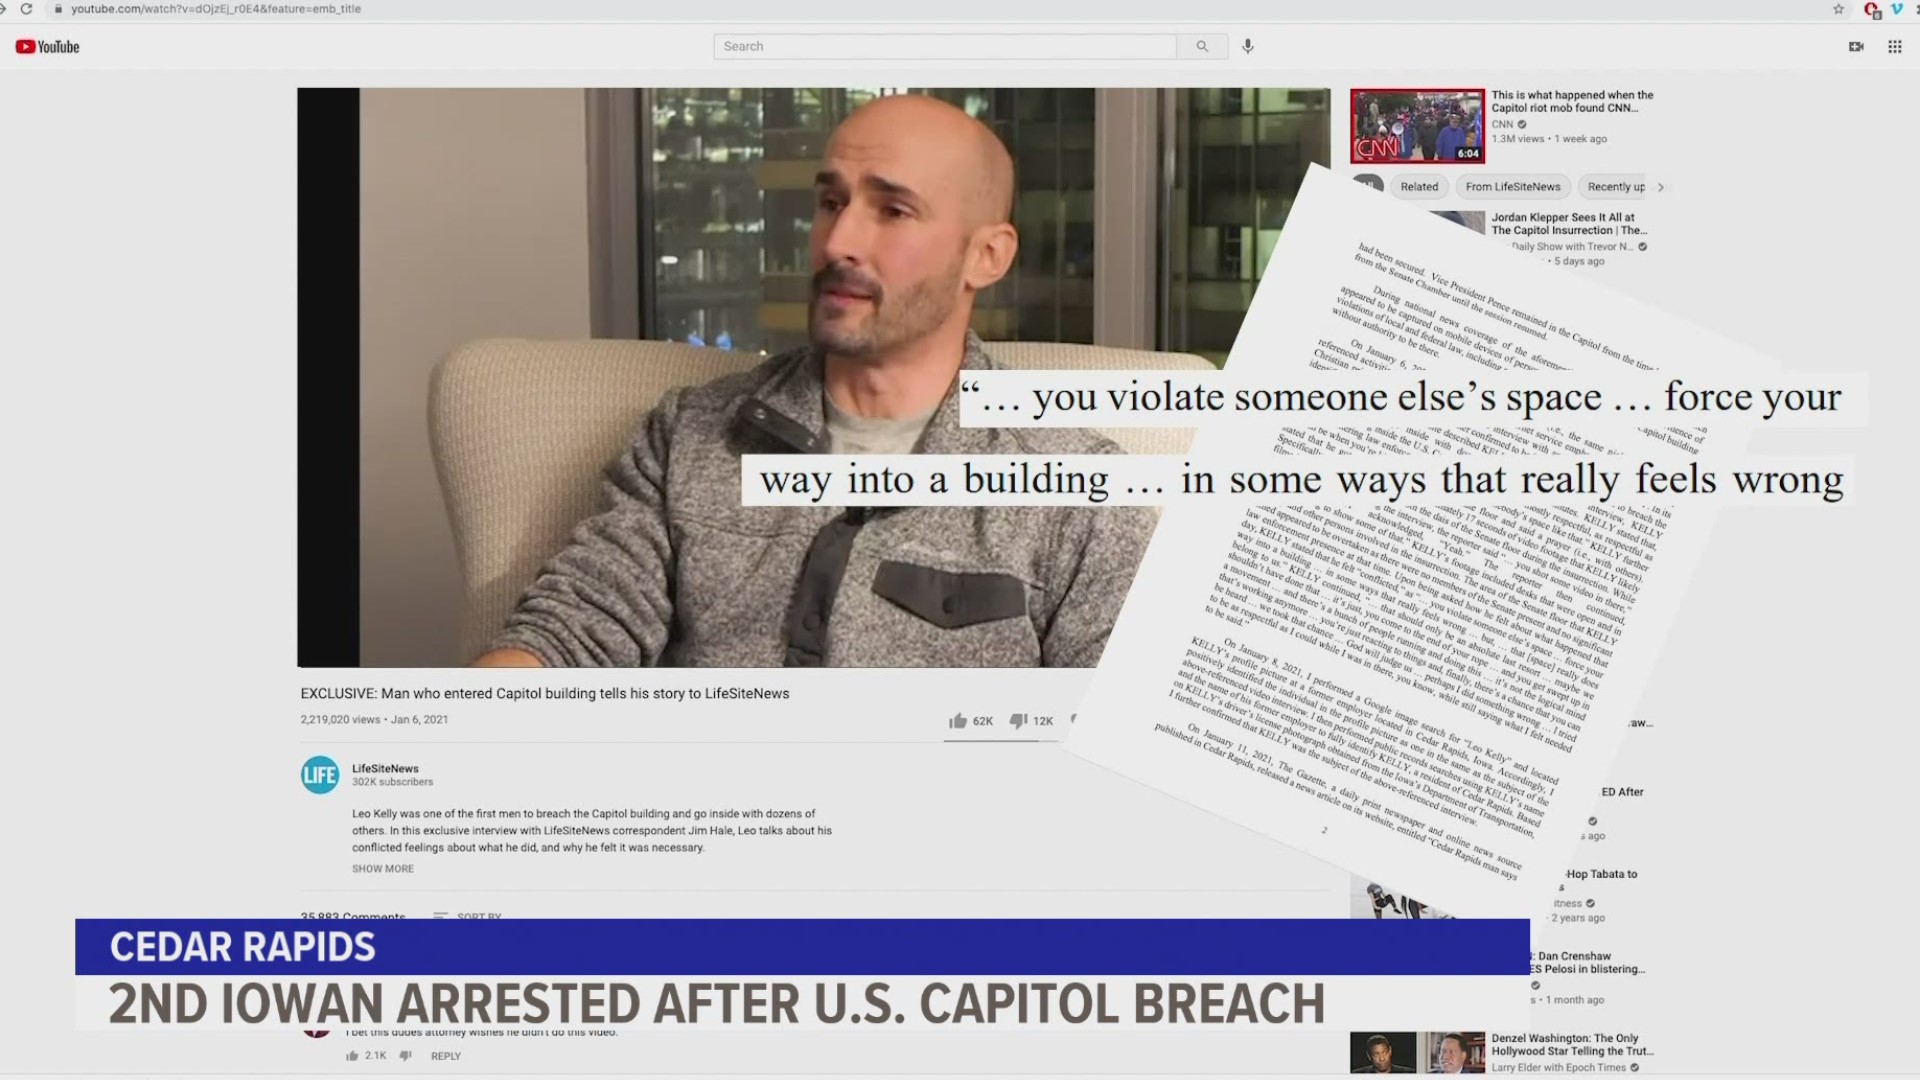 In a 7-minute interview with LifeSiteNews.com, Leo Kelly, of Cedar Rapids, described storming the US Capitol. The interview is now cited in his criminal complaint.